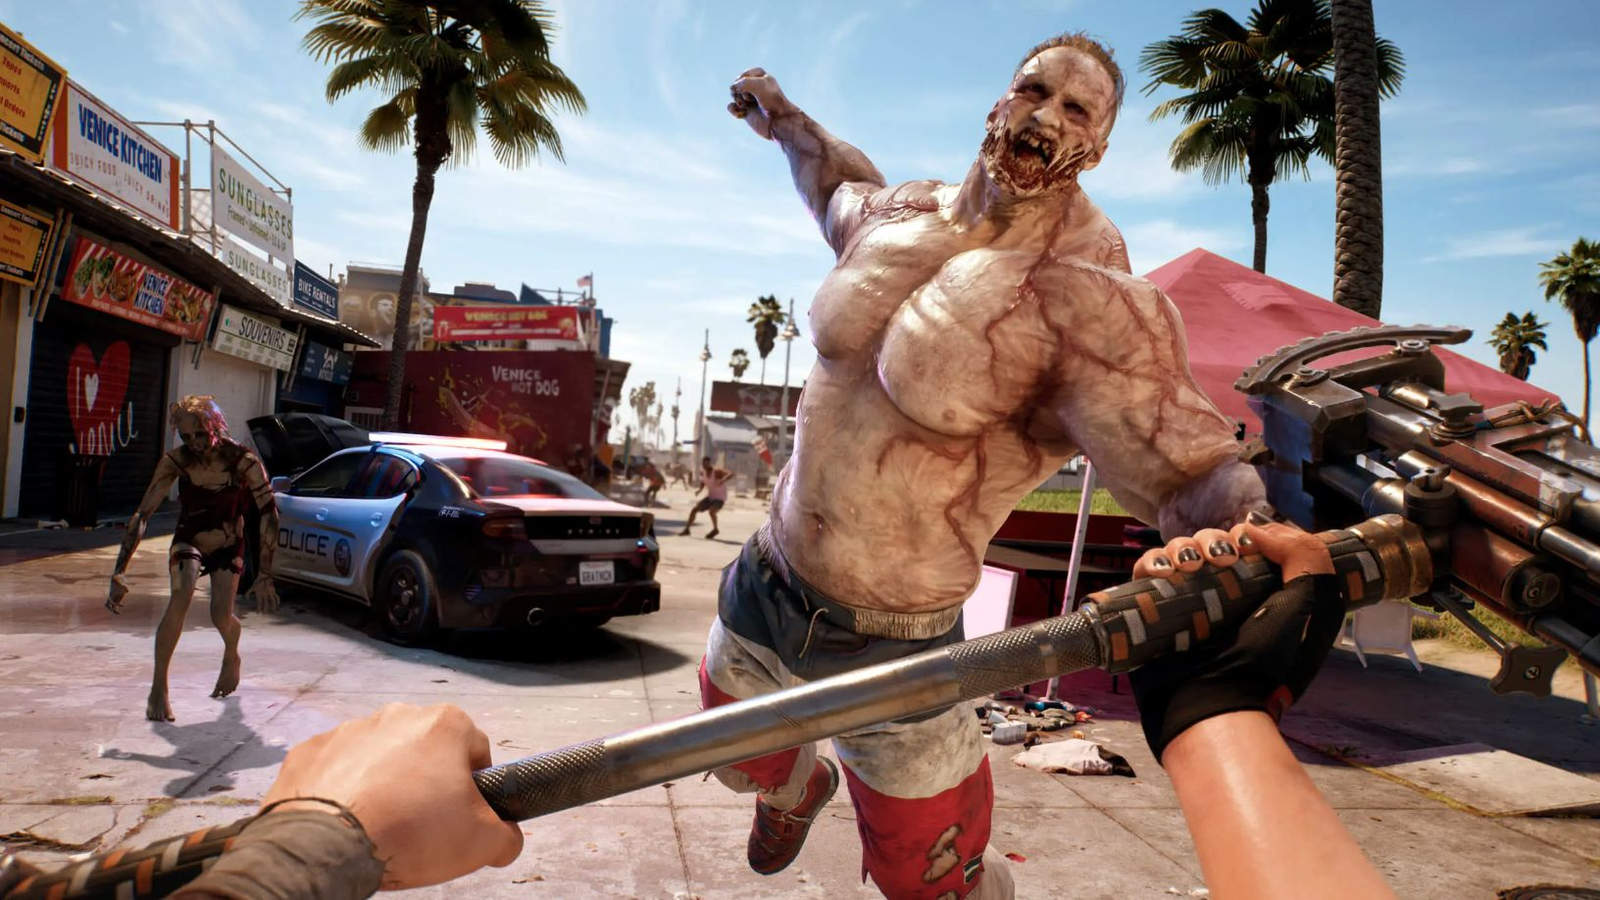 Dead Island 2 Gameplay and Impressions 